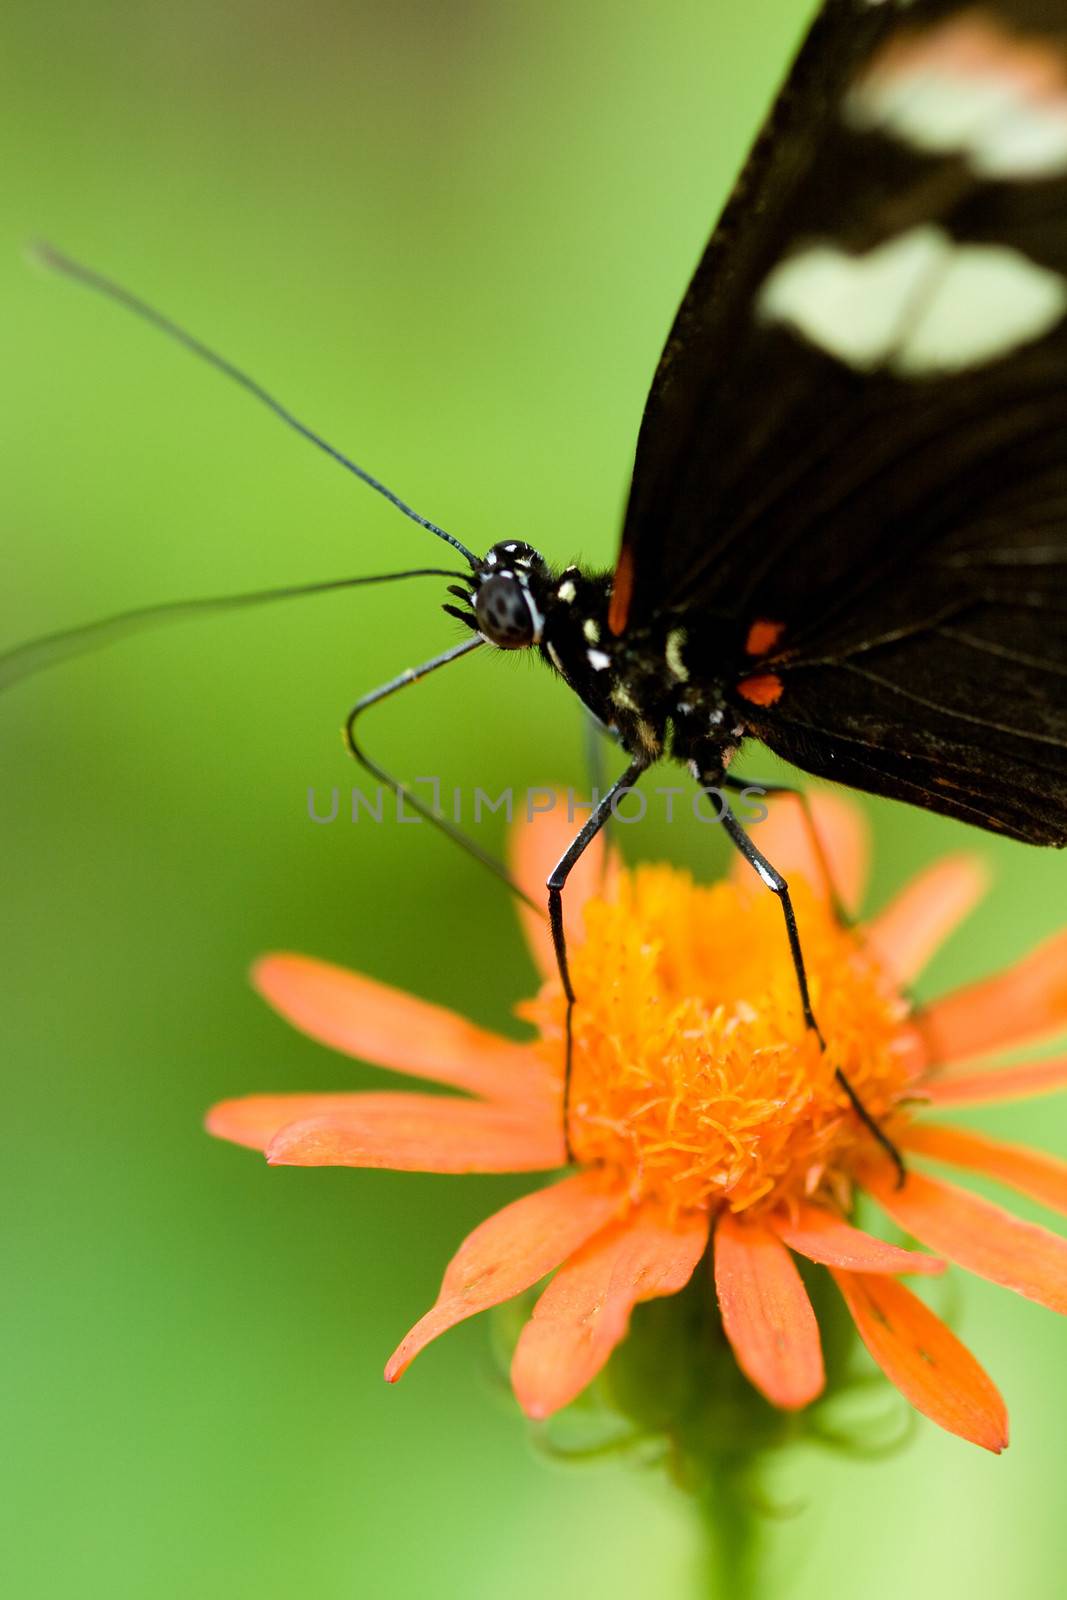 A close up of a butterfly on a flower.